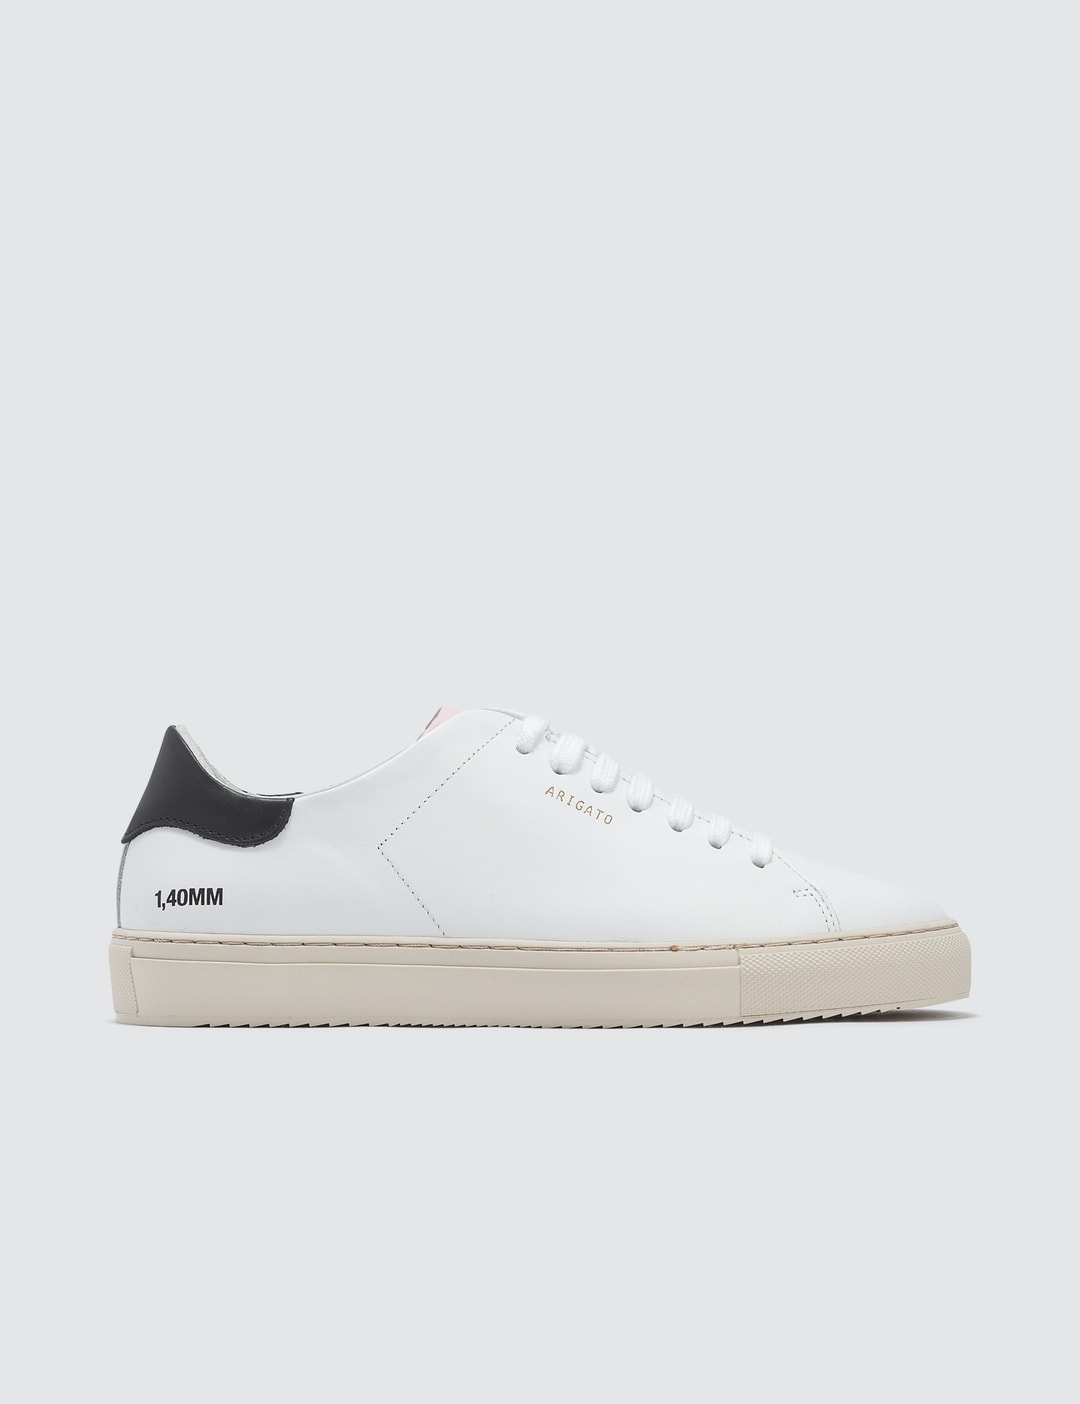 Axel Arigato - Clean 90 Sneaker | HBX - Globally Curated Fashion and ...